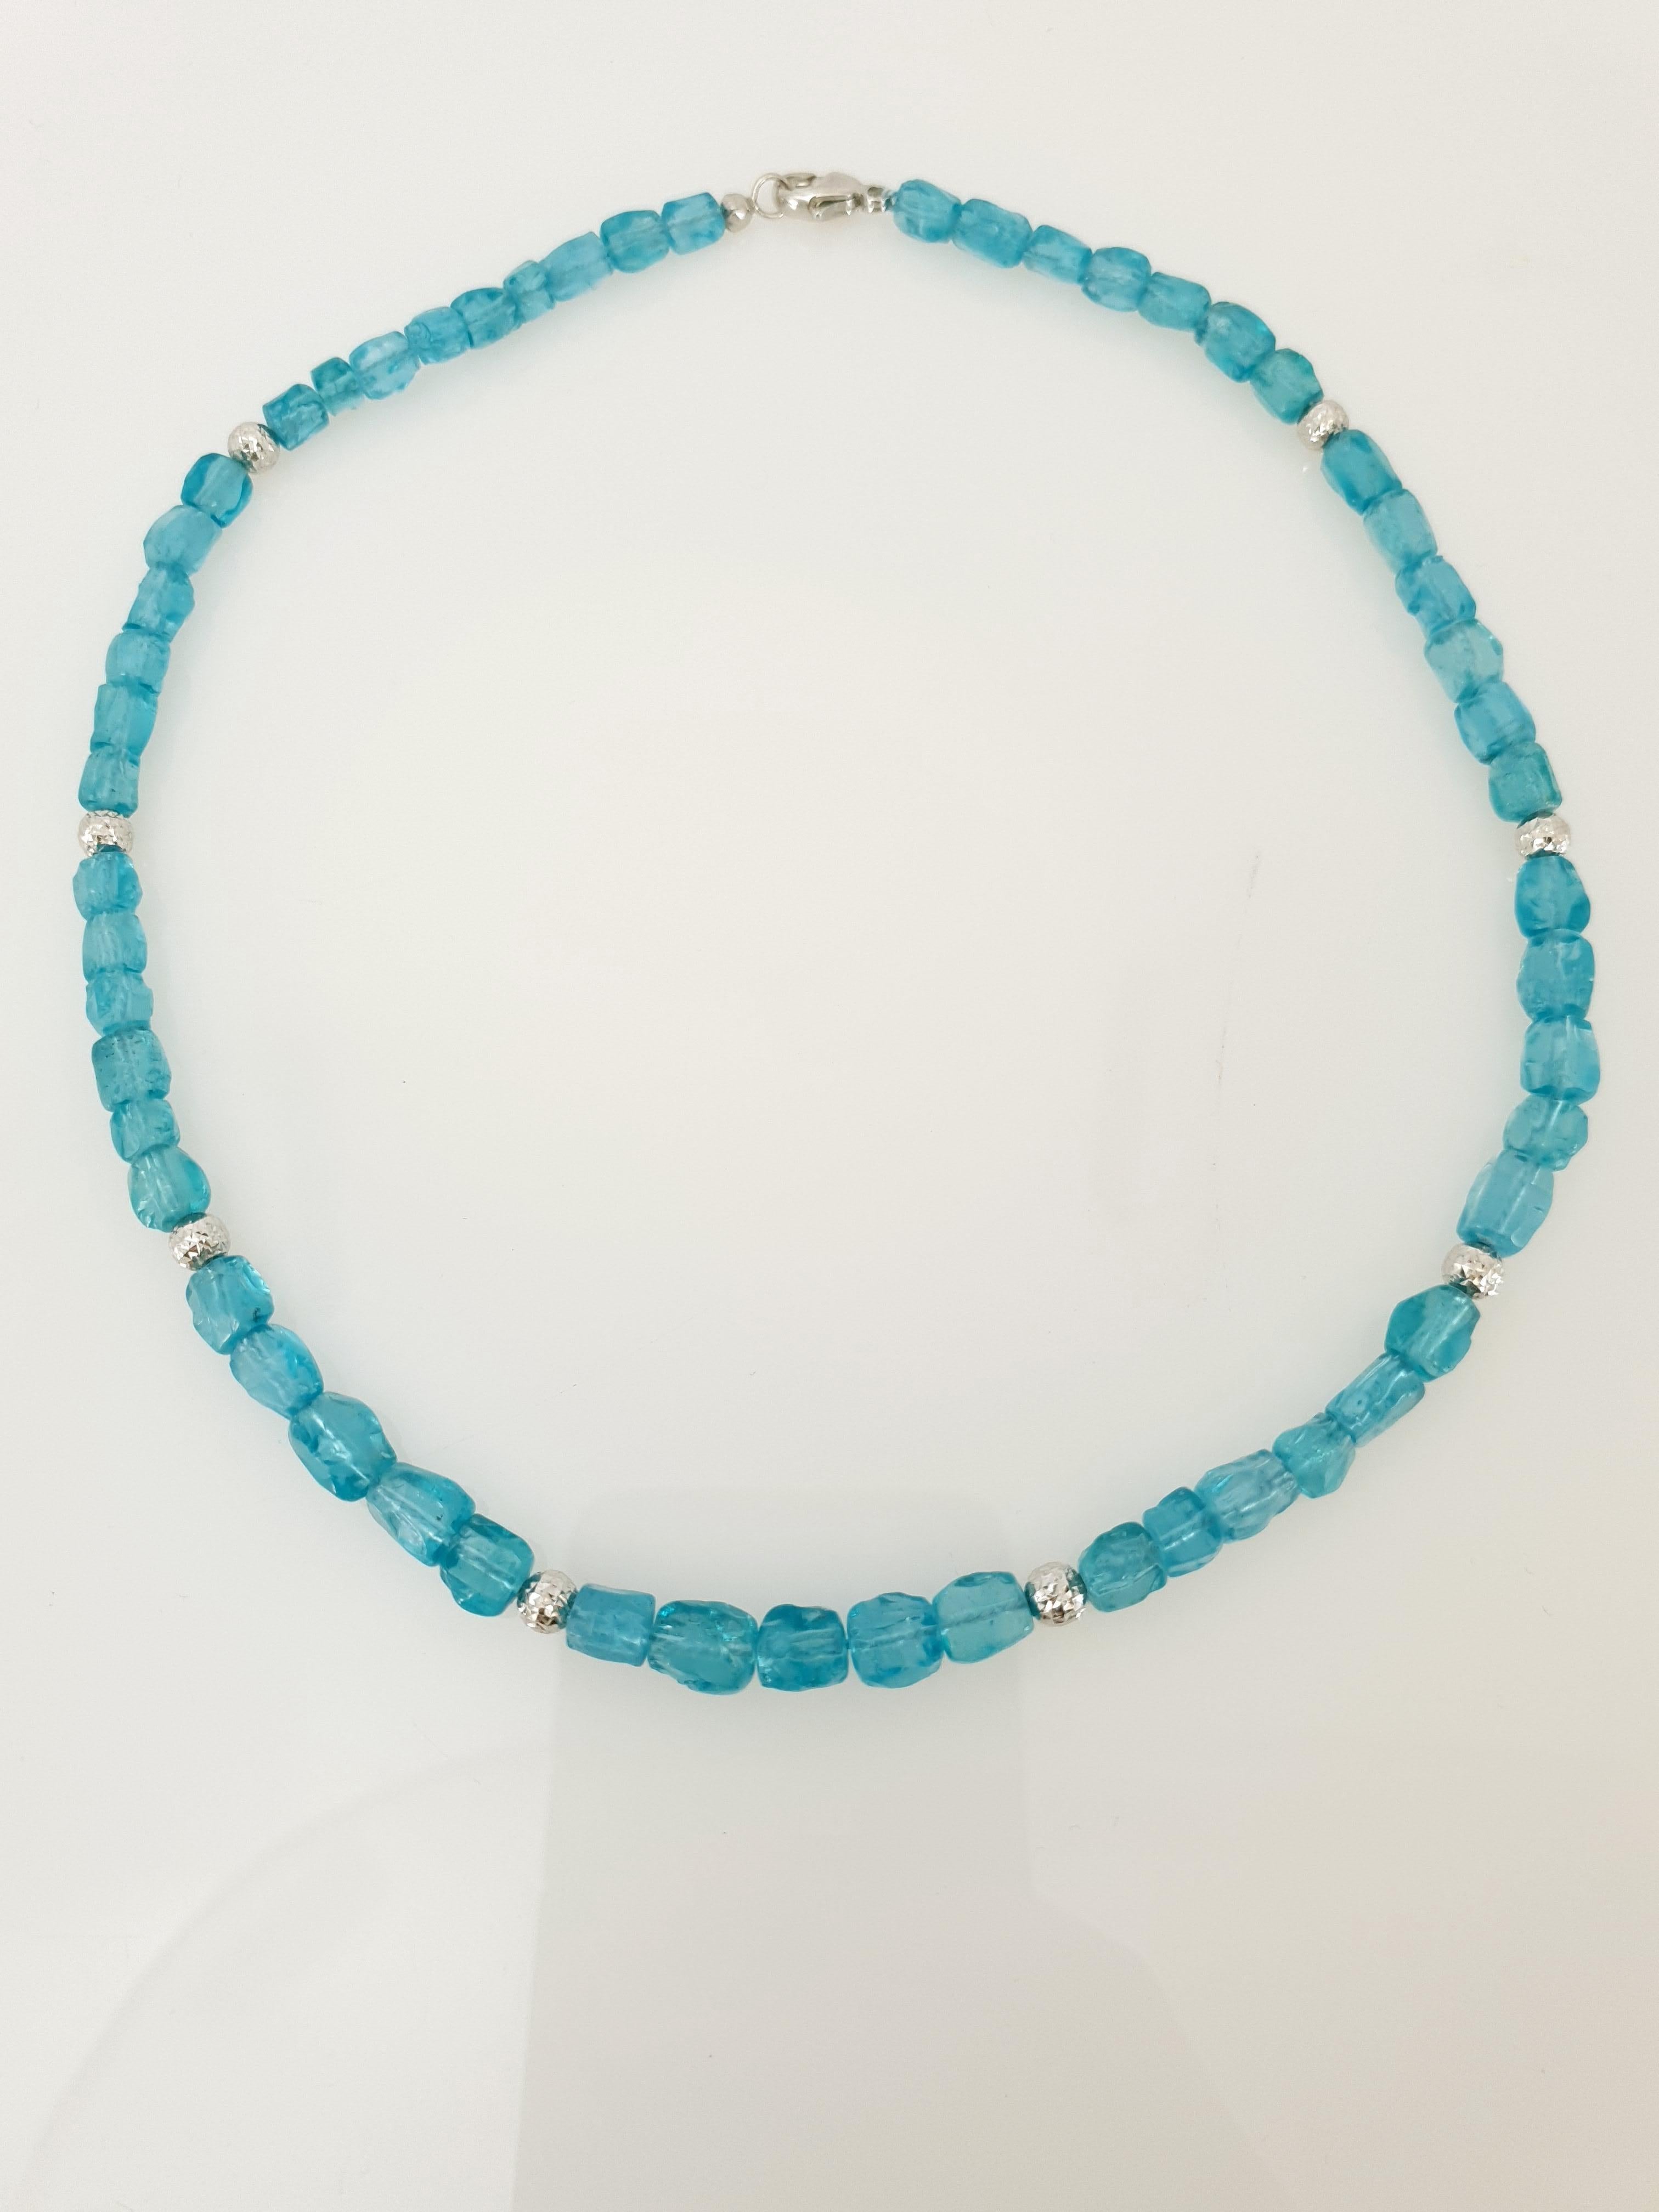 Paraiba Blue Apatite Nugget Beaded Necklace with 18 Carat White Gold 2